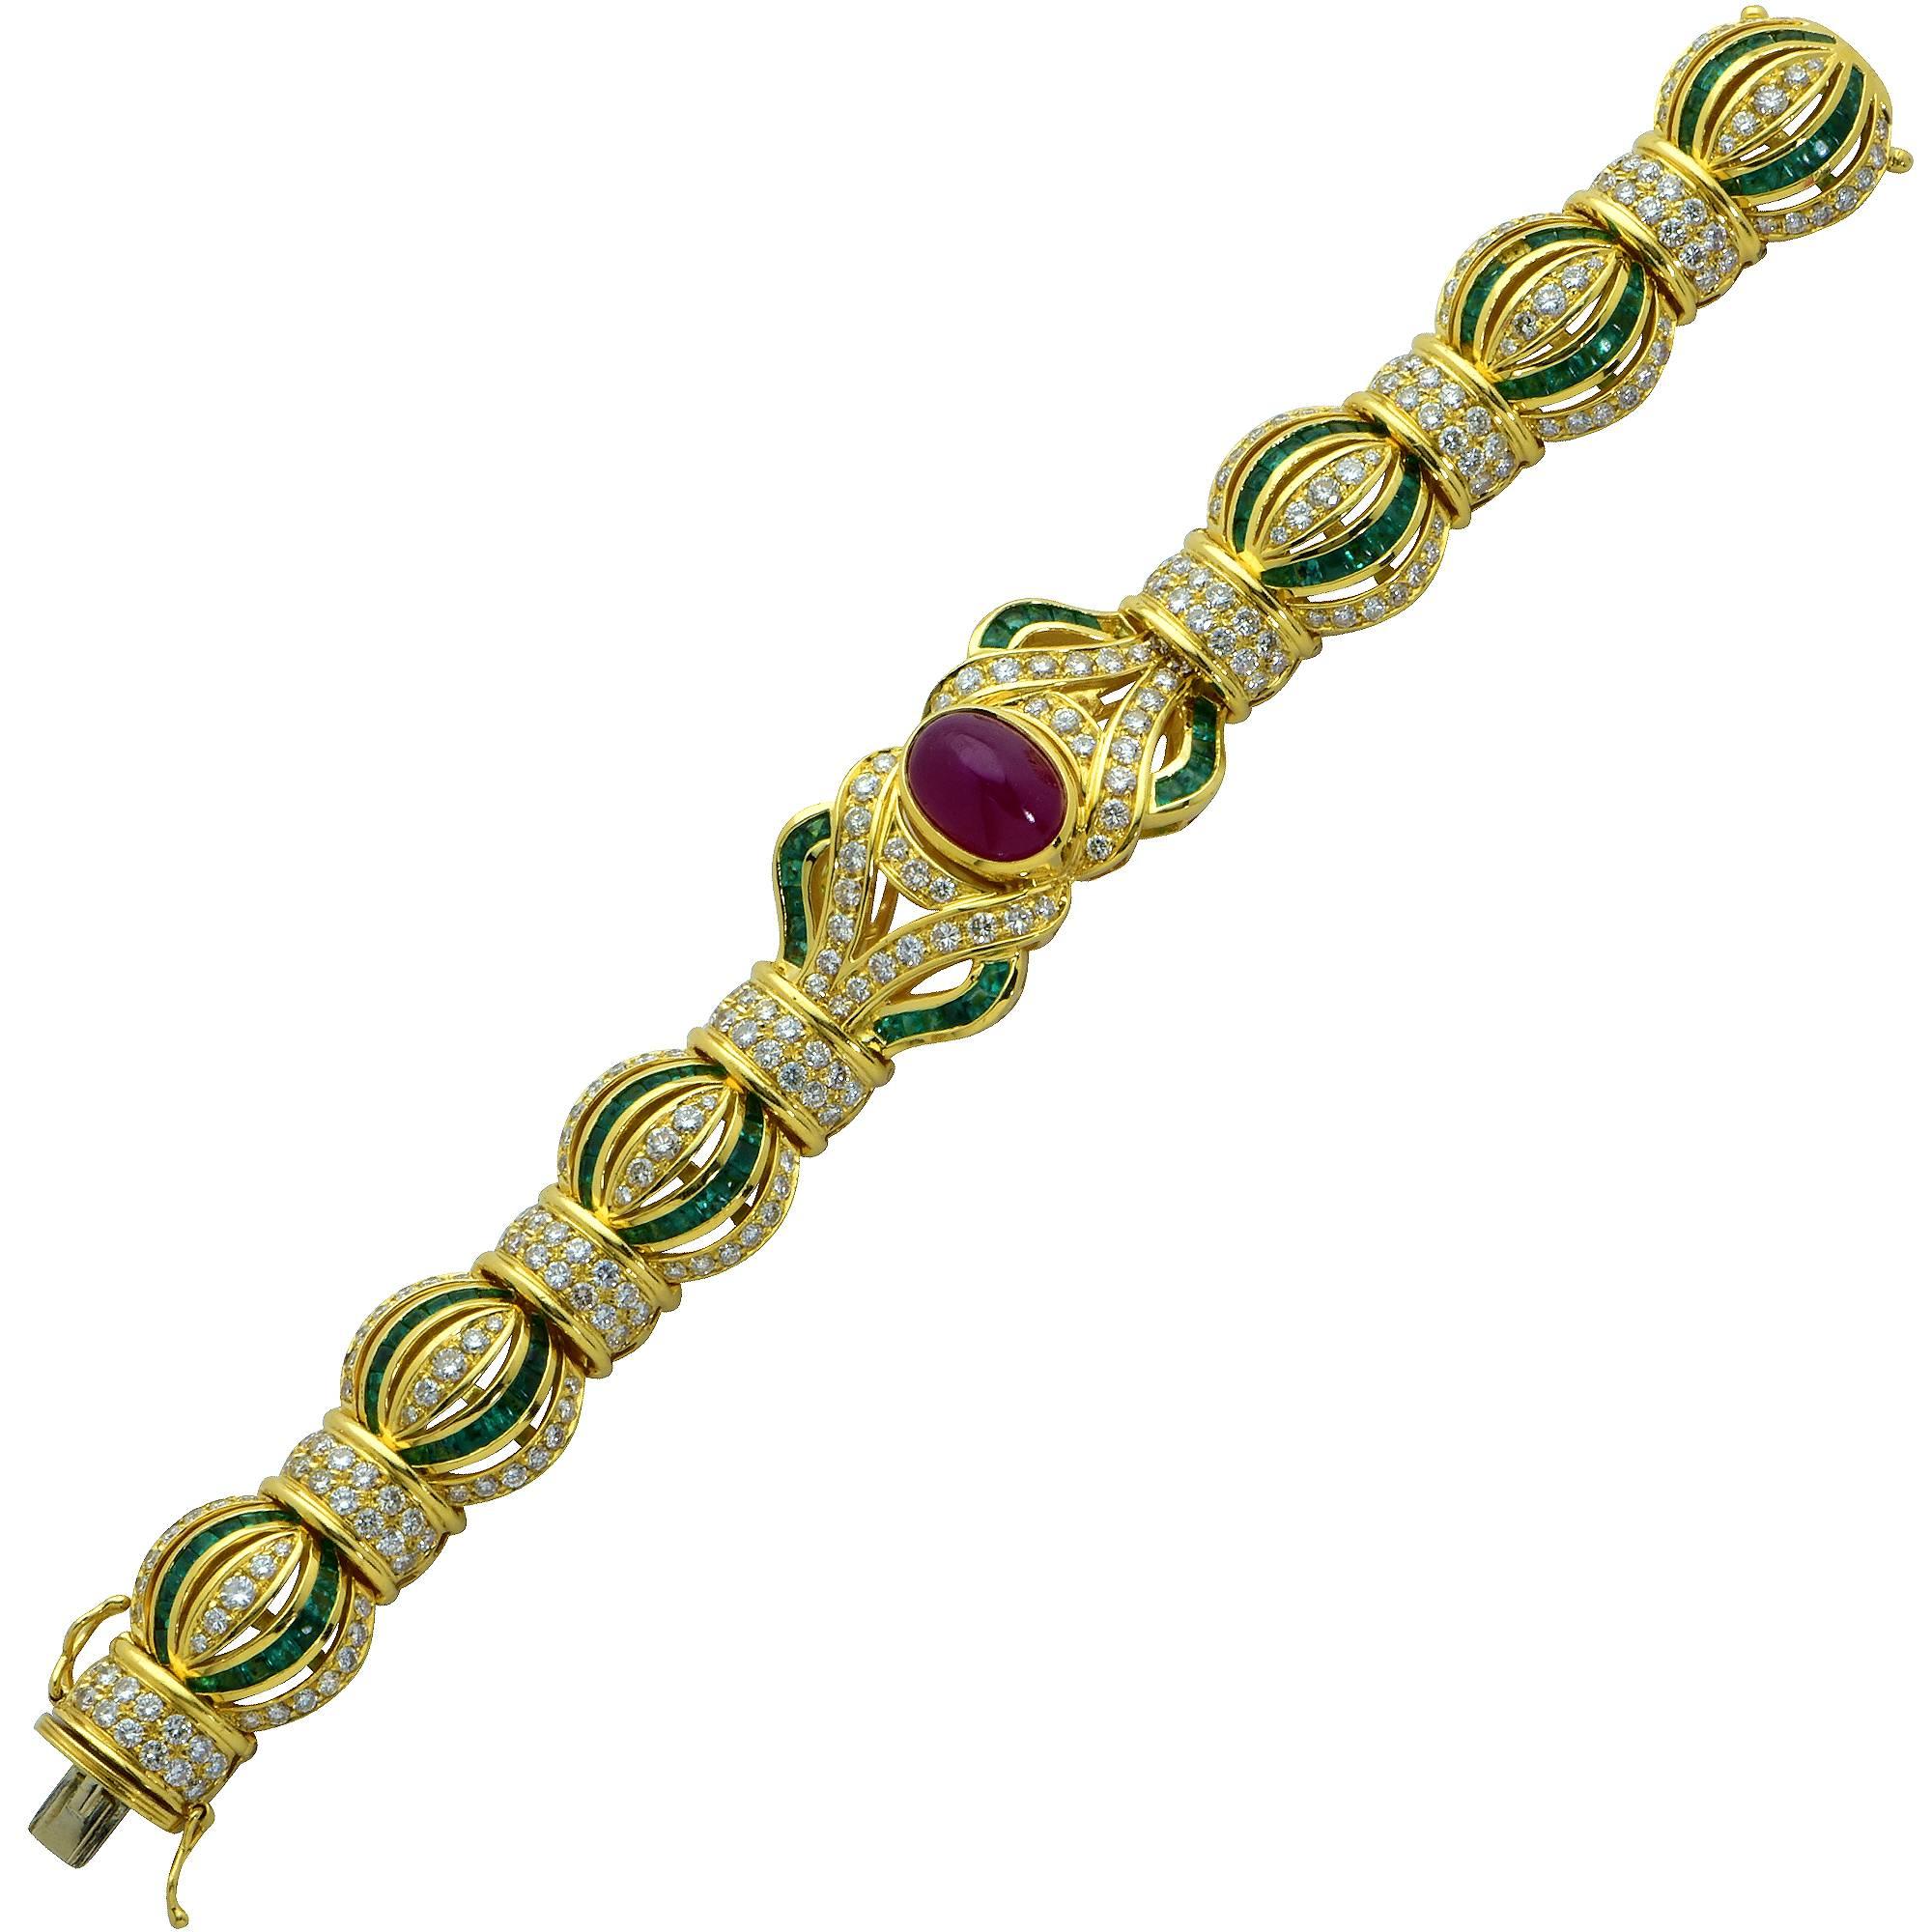 18k yellow gold bracelet signed Giovane featuring approximately 7cts of round brilliant cut diamonds G color VS clarity accented by emeralds and a ruby cabochon.

Measurements are available upon request.
It is stamped and/or tested as 18k gold.
The